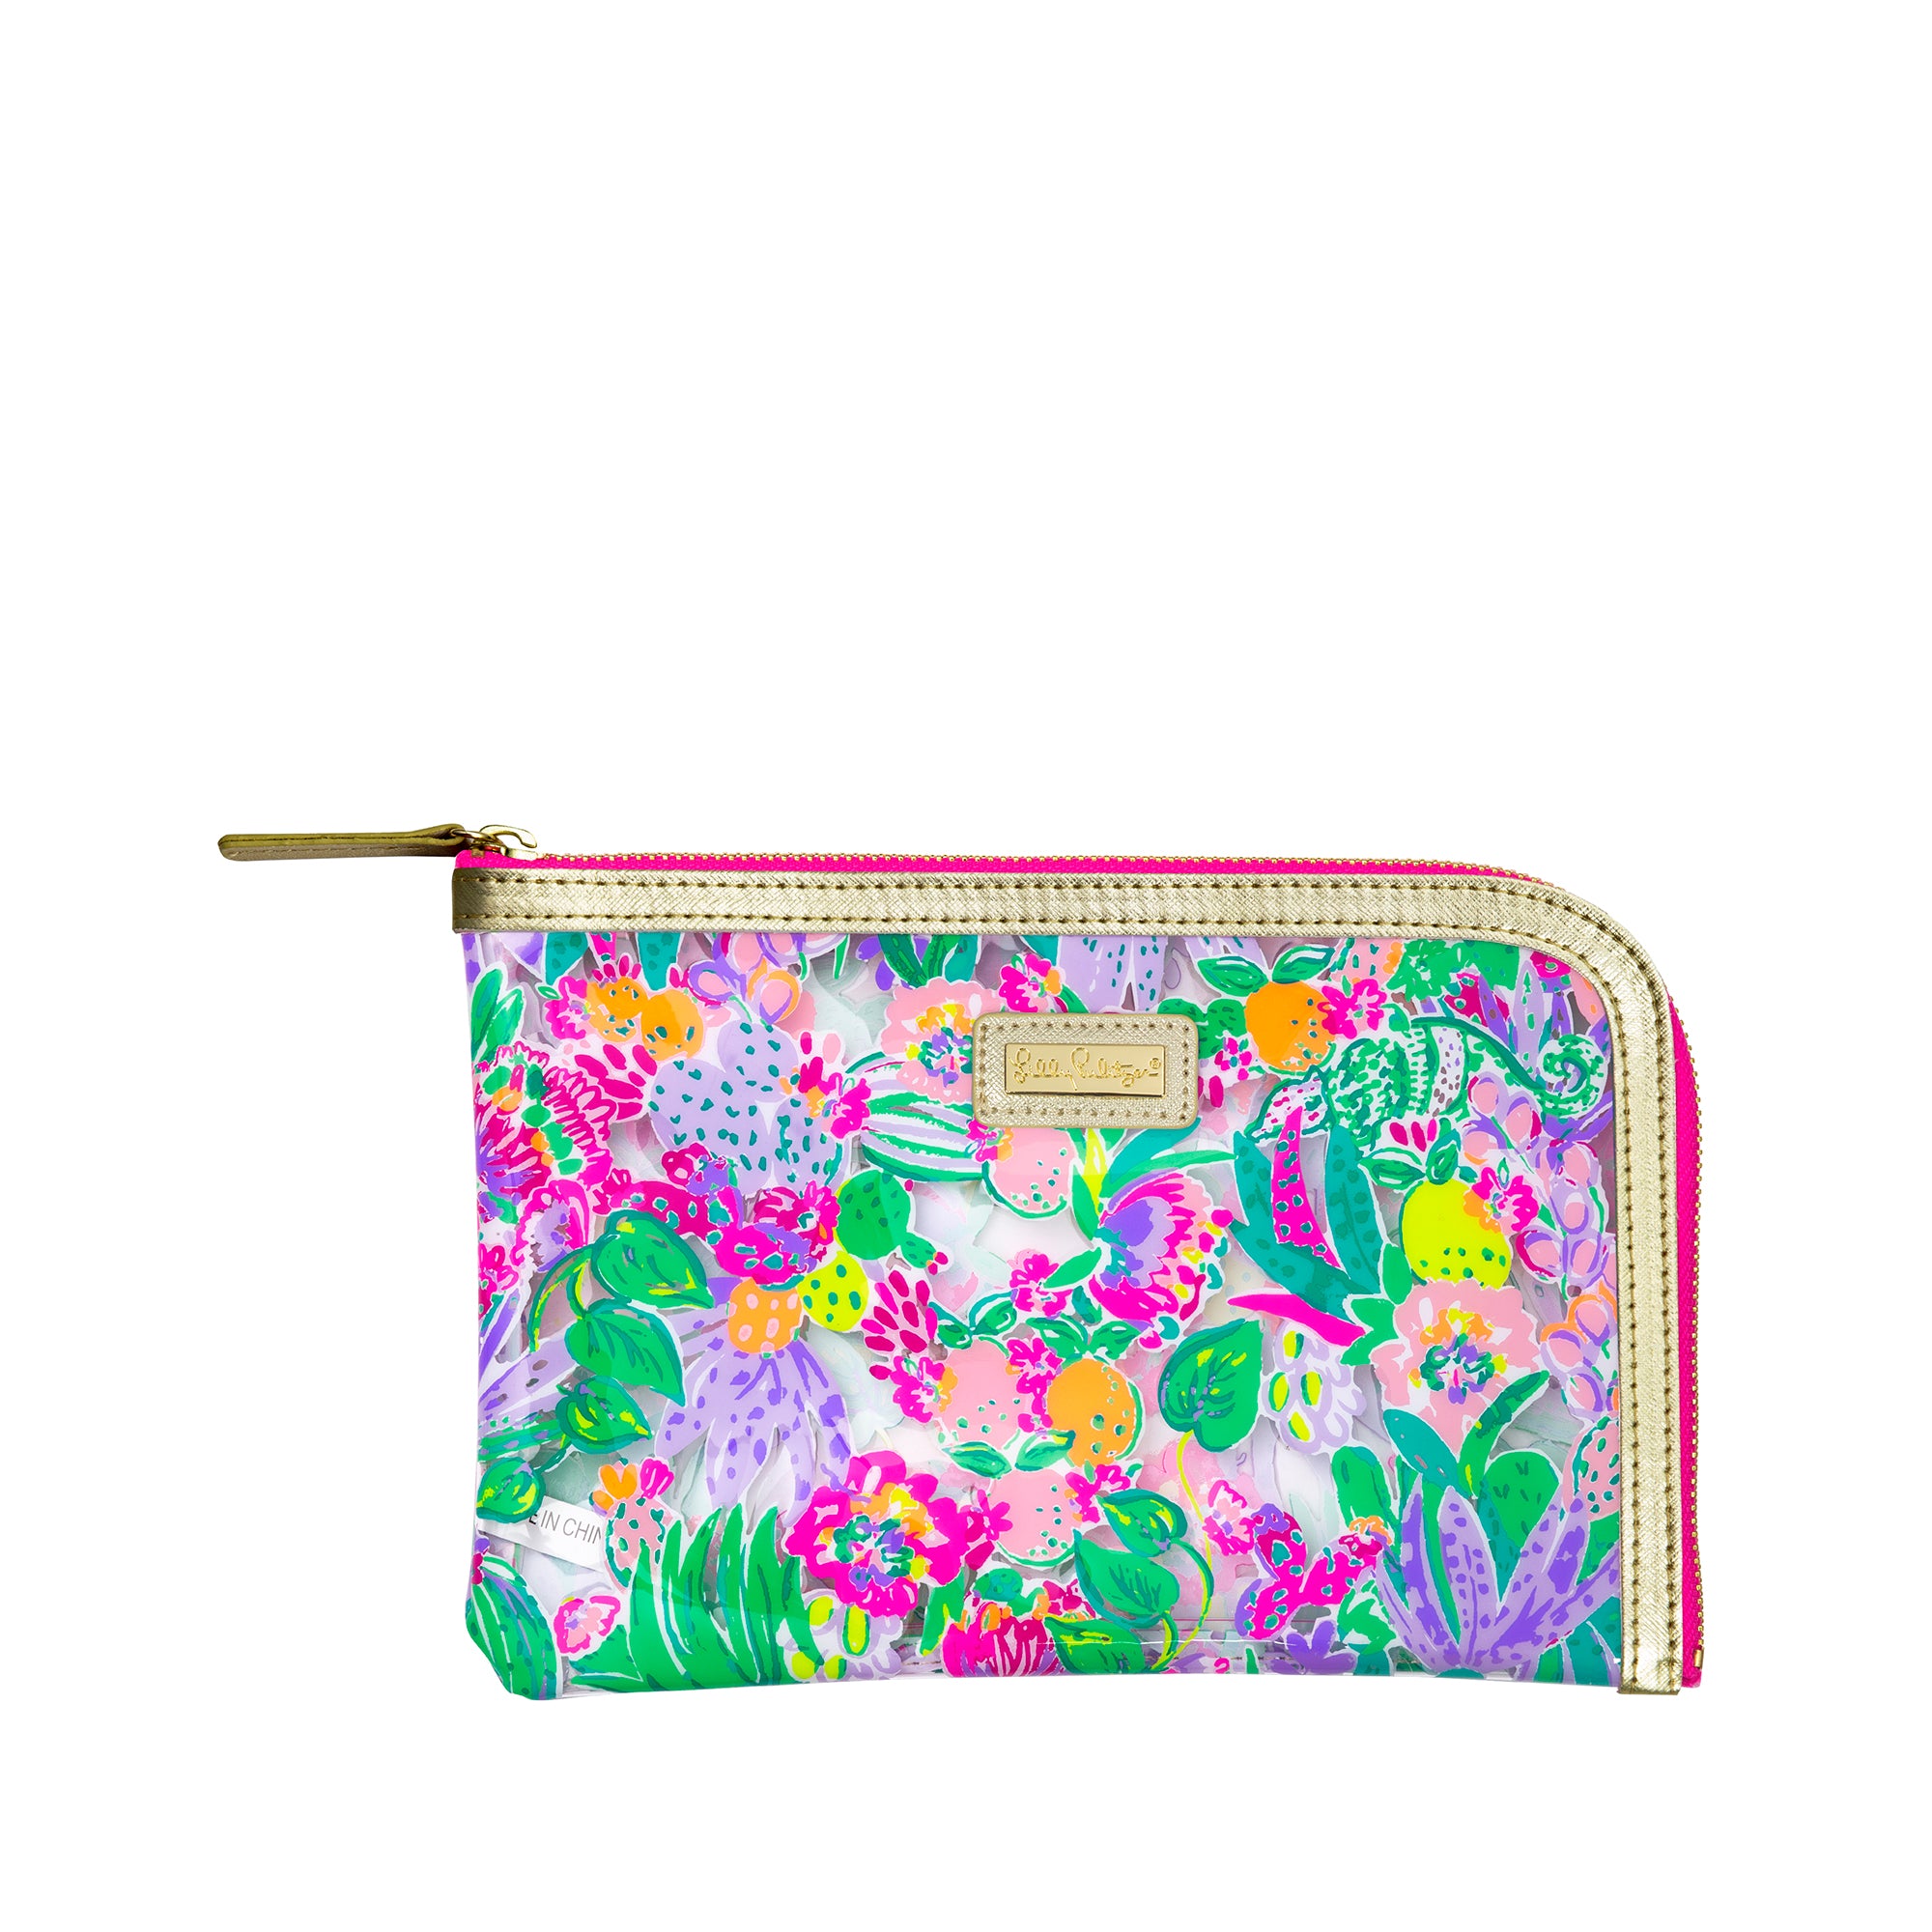 Agenda Bonus Pack by Lilly Pulitzer - Me and My Zesty